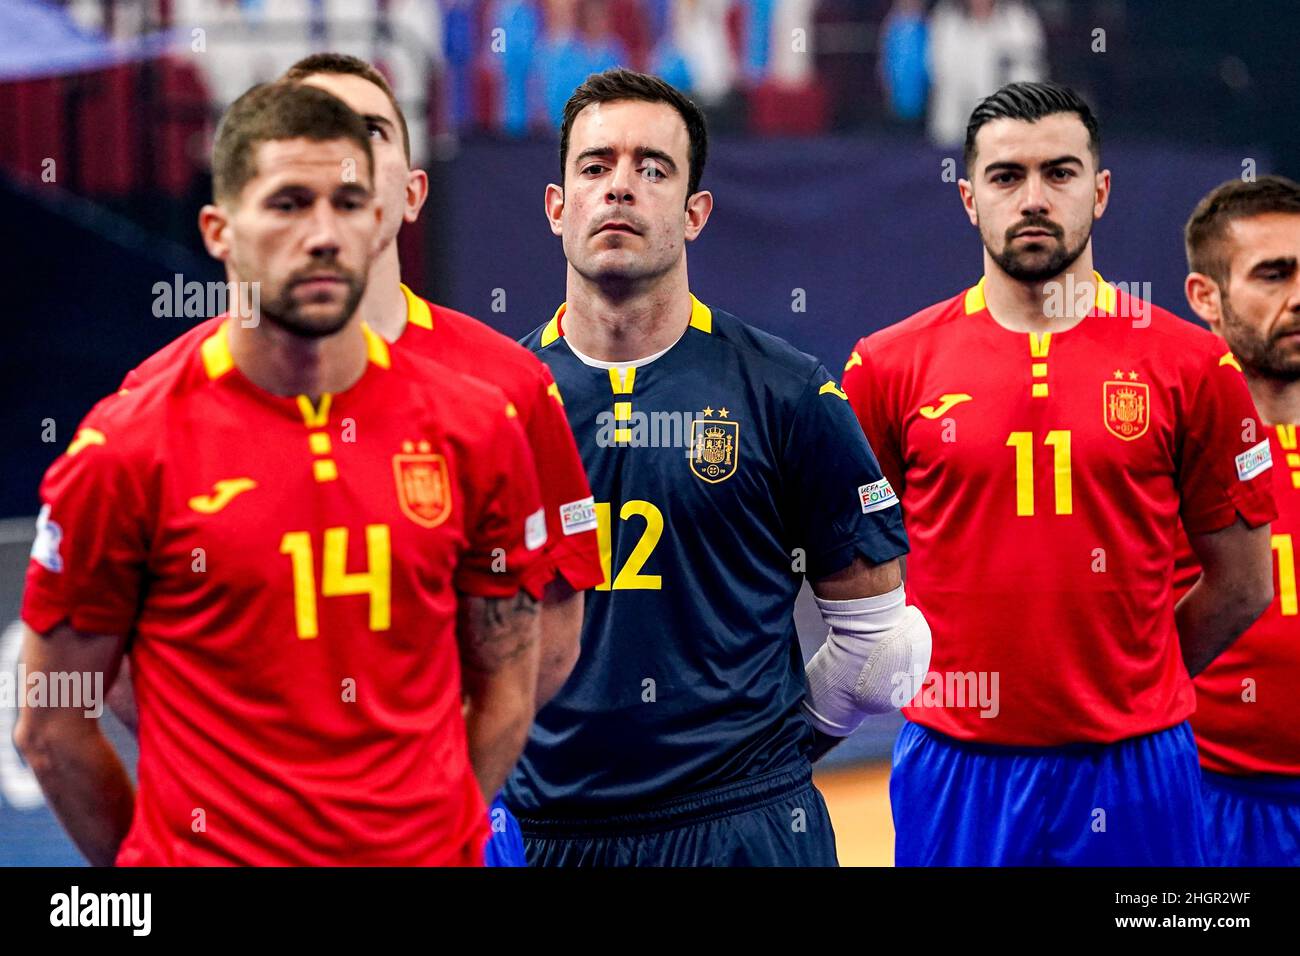 GRONINGEN, NETHERLANDS - JANUARY 22: Team Spain, Raul Campos of Spain, Didac Plana of Spain, Chino during the Men's Futsal Euro 2022 Group D match between Spain and the Bosnia and Herzegovina at the Martiniplaza on January 22, 2022 in Groningen, Netherlands (Photo by Andre Weening/Orange Pictures) Stock Photo